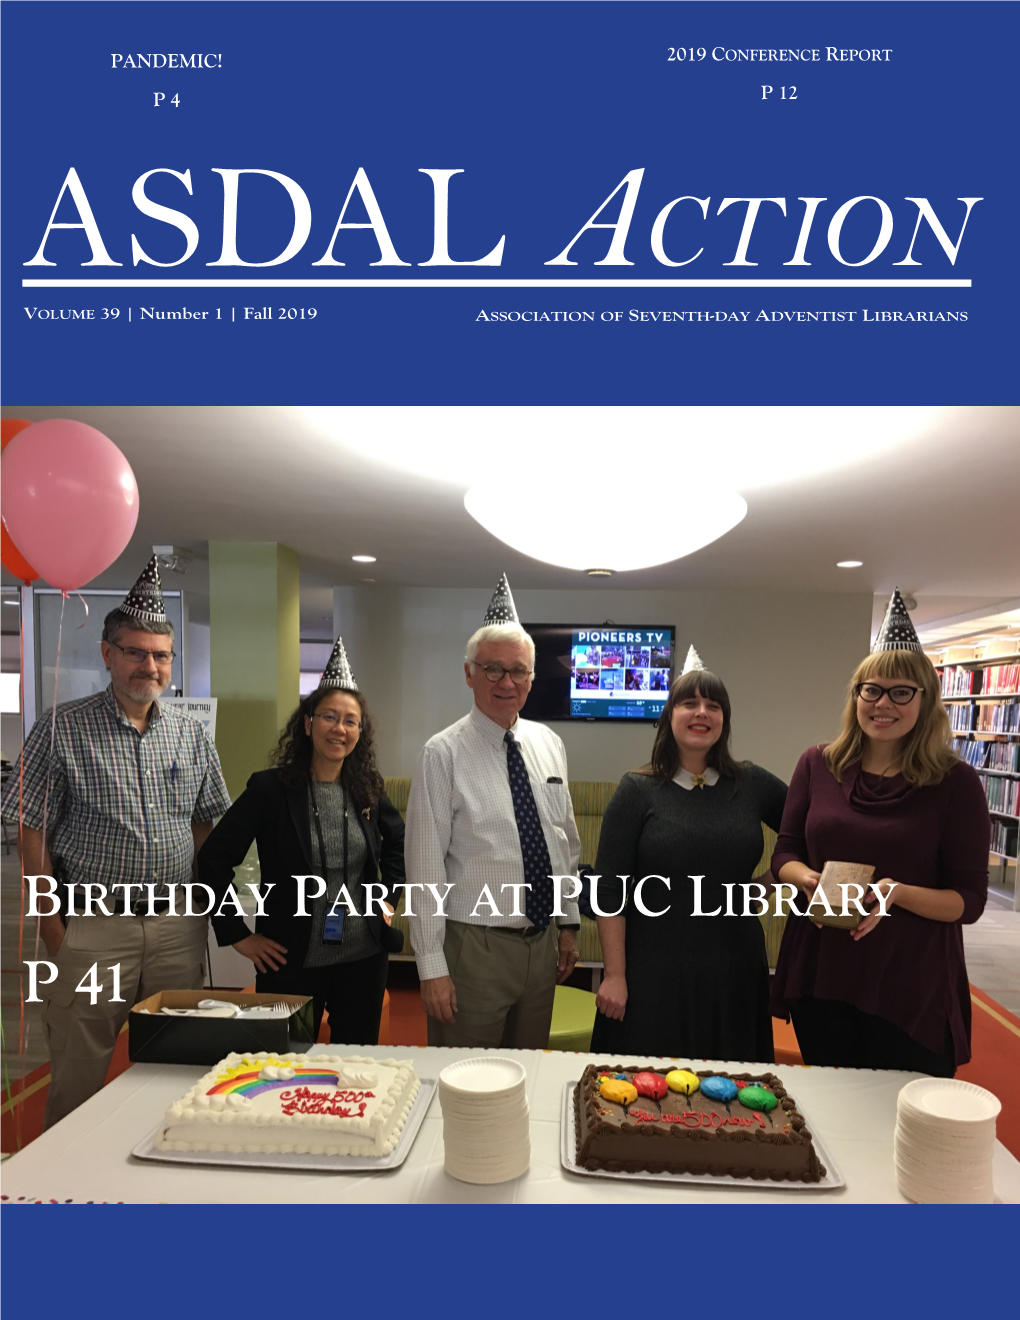 Birthday Party at Puc Library P 41